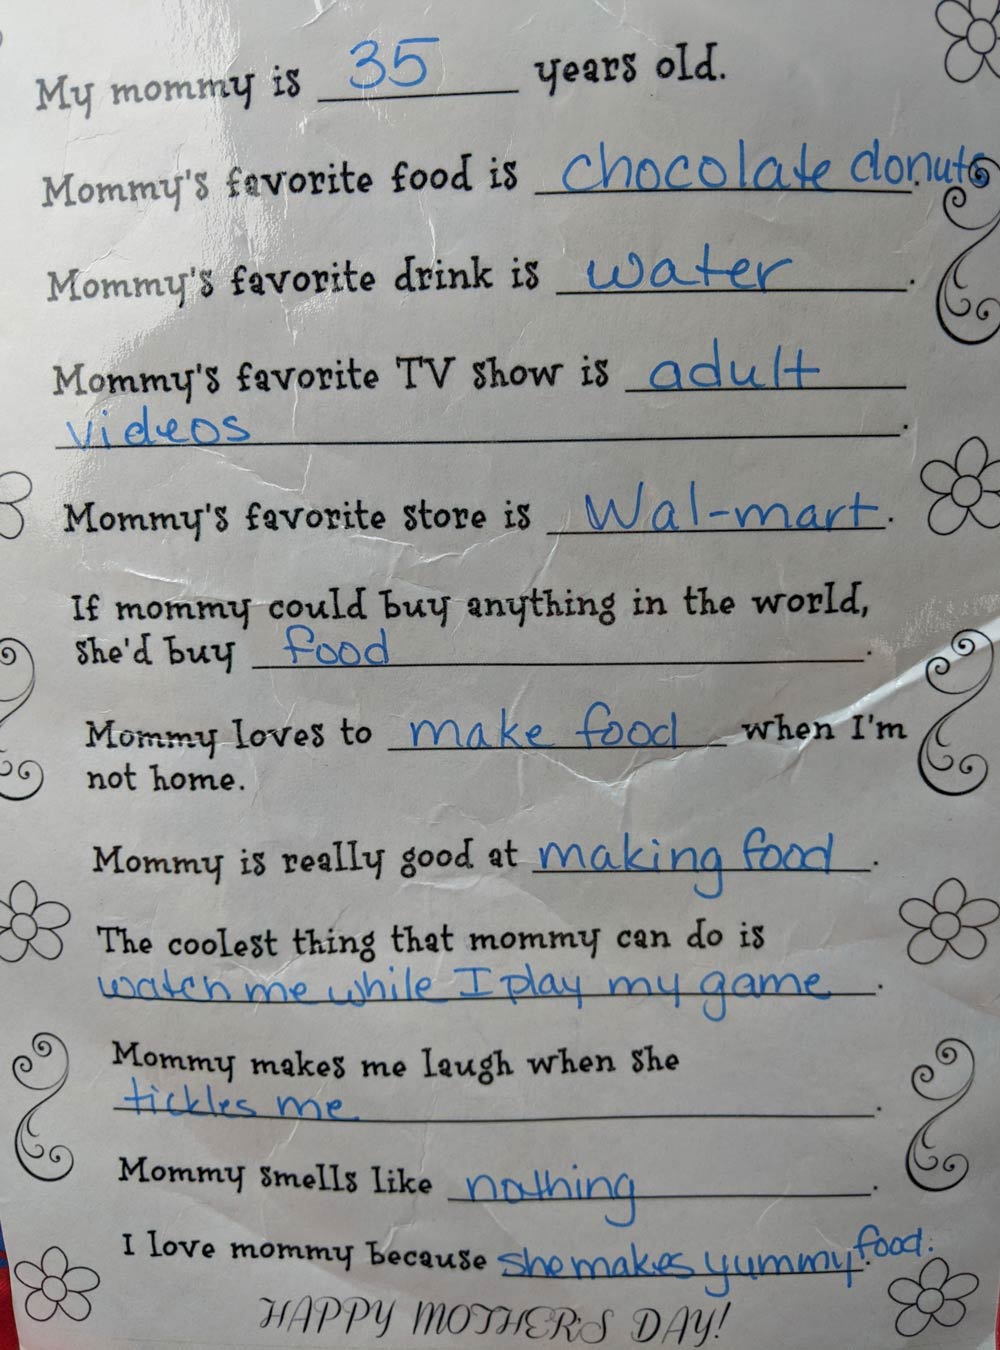 Found this gem from my son's school a year ago. My wife is still mortified!